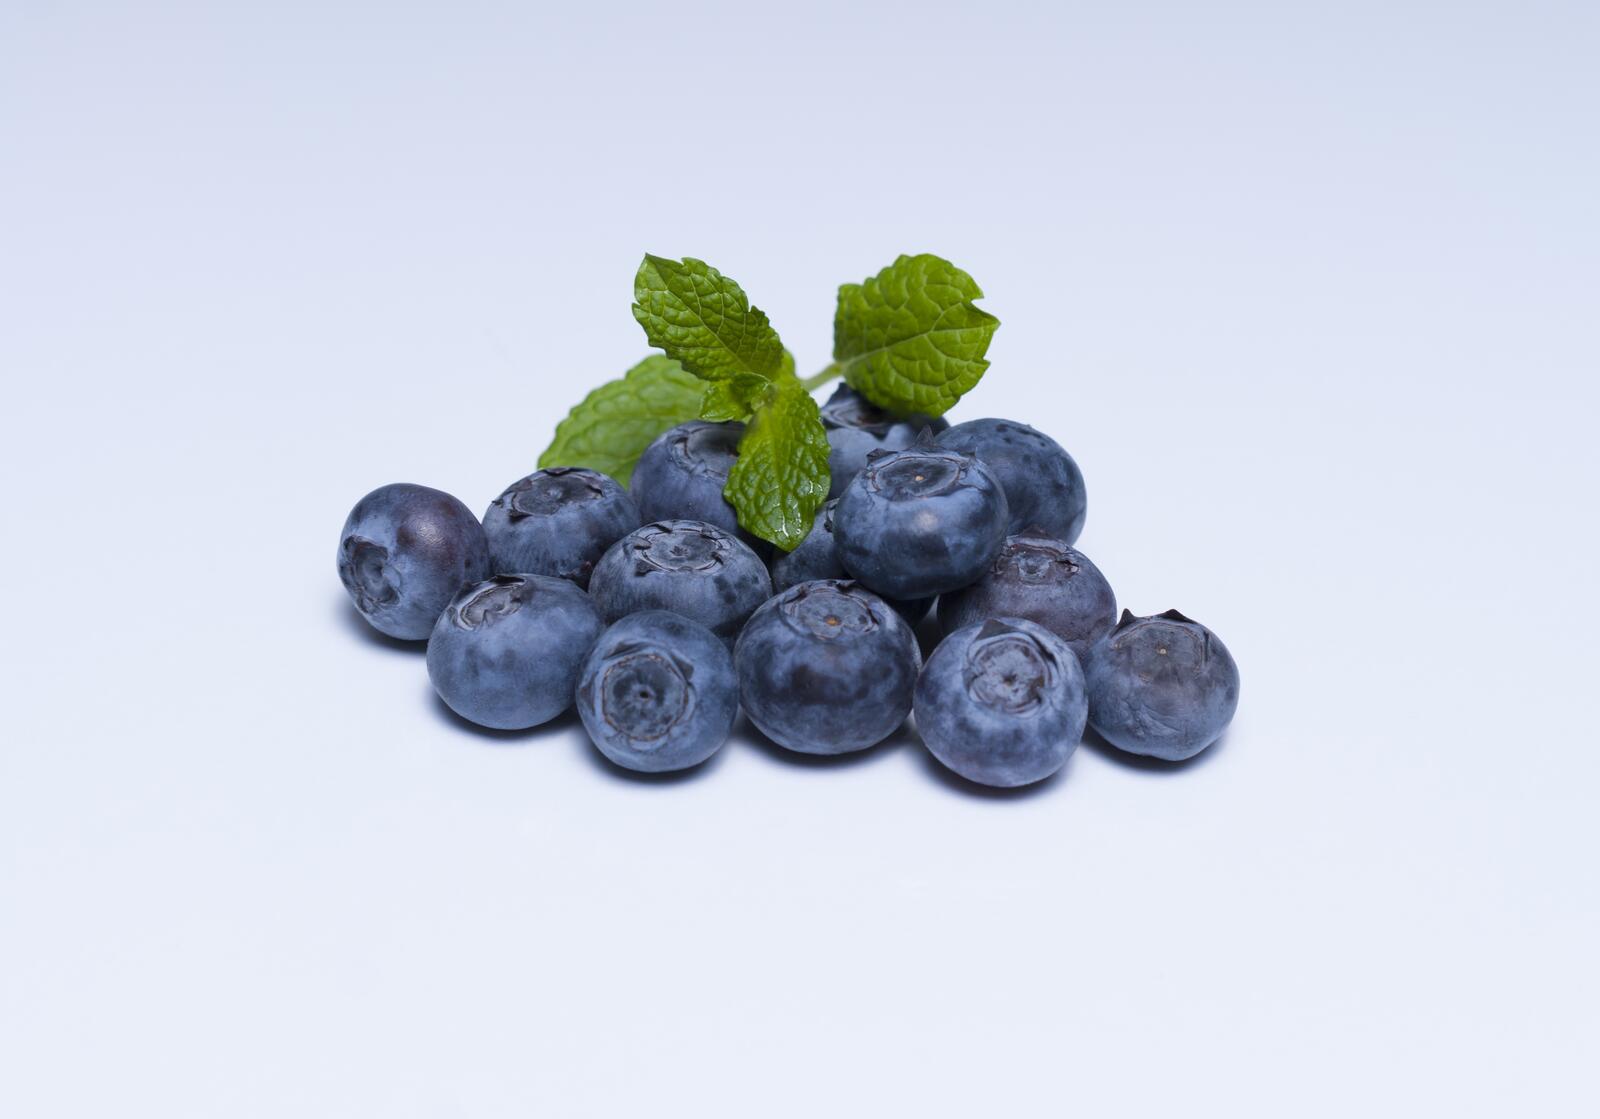 Wallpapers plant fruits berry on the desktop